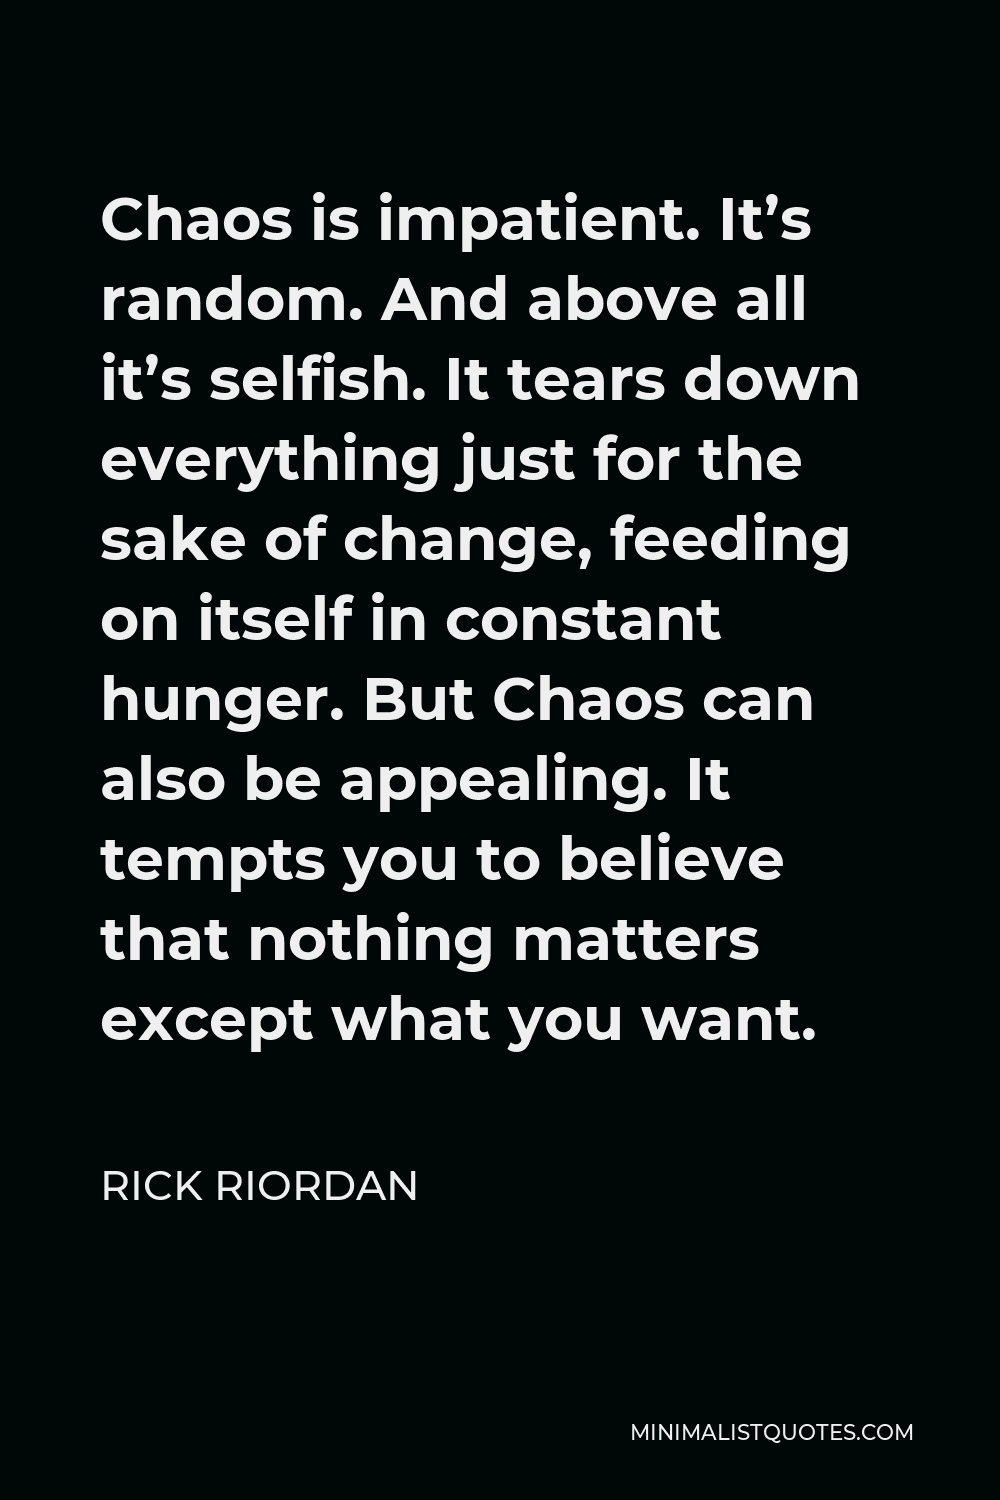 Rick Riordan Quote - Chaos is impatient. It’s random. And above all it’s selfish. It tears down everything just for the sake of change, feeding on itself in constant hunger. But Chaos can also be appealing. It tempts you to believe that nothing matters except what you want.